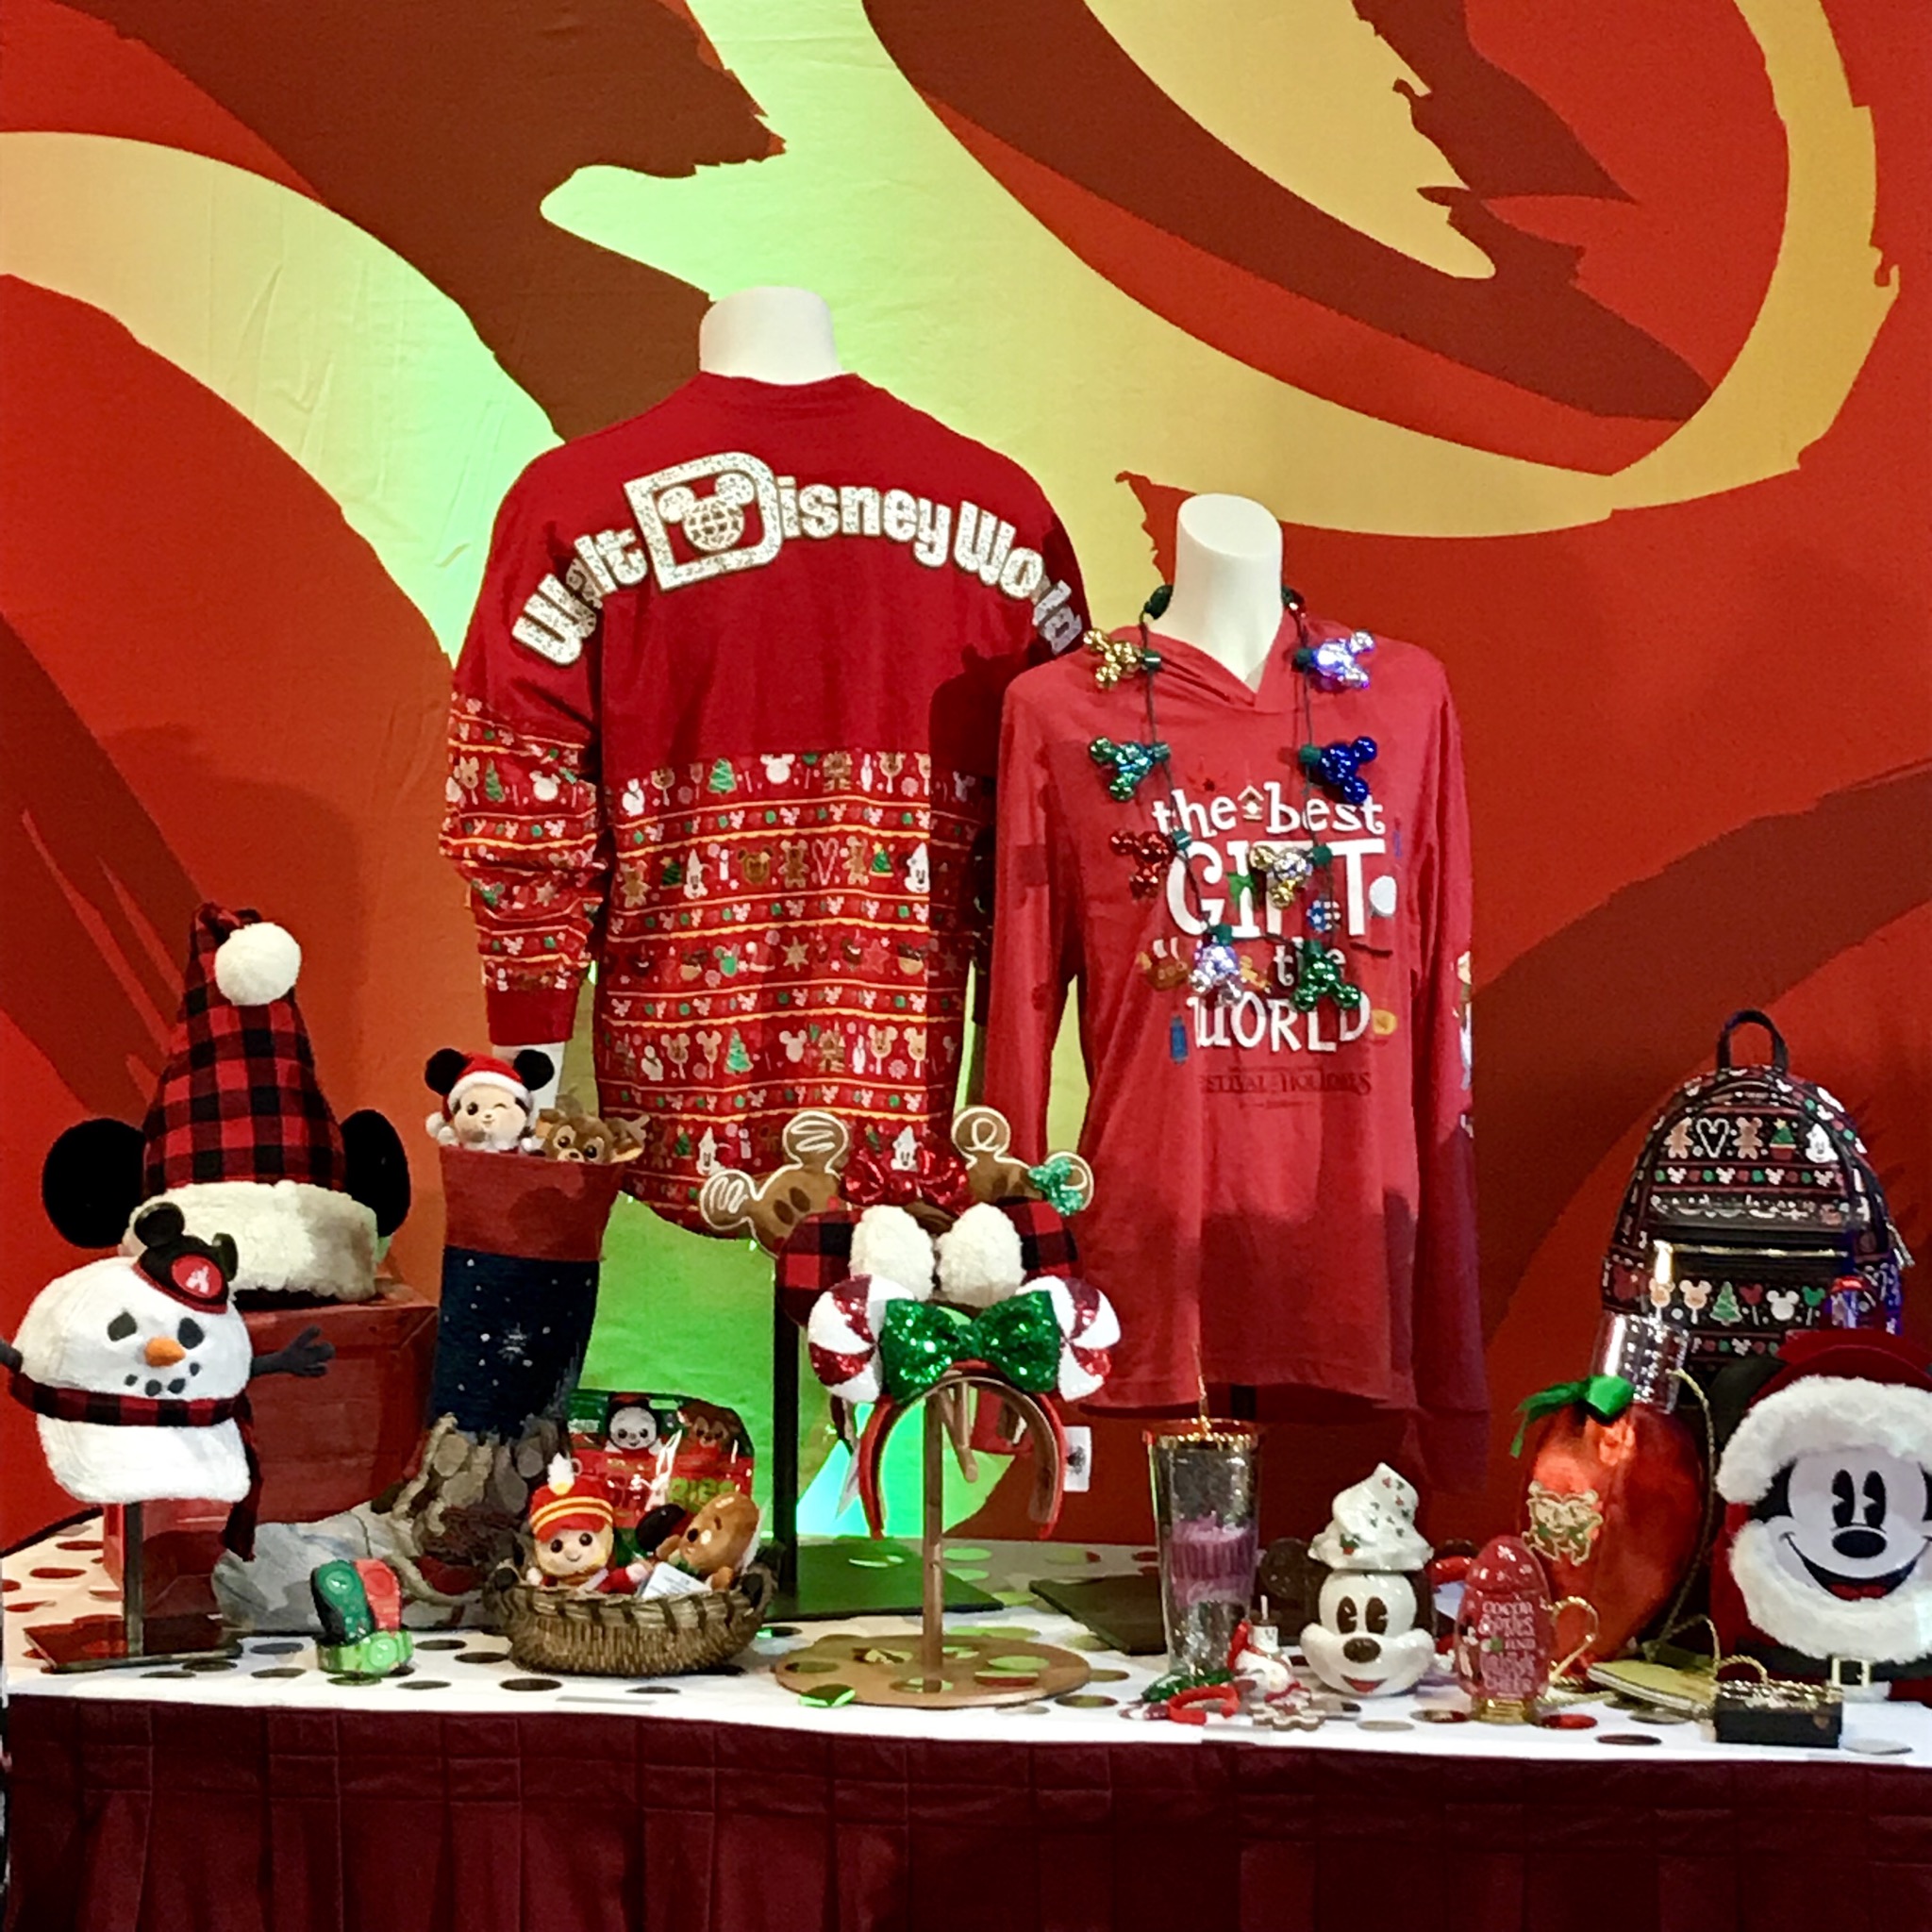 Fabulous Disney Holiday Merchandise Revealed At Disney’s Christmas In July